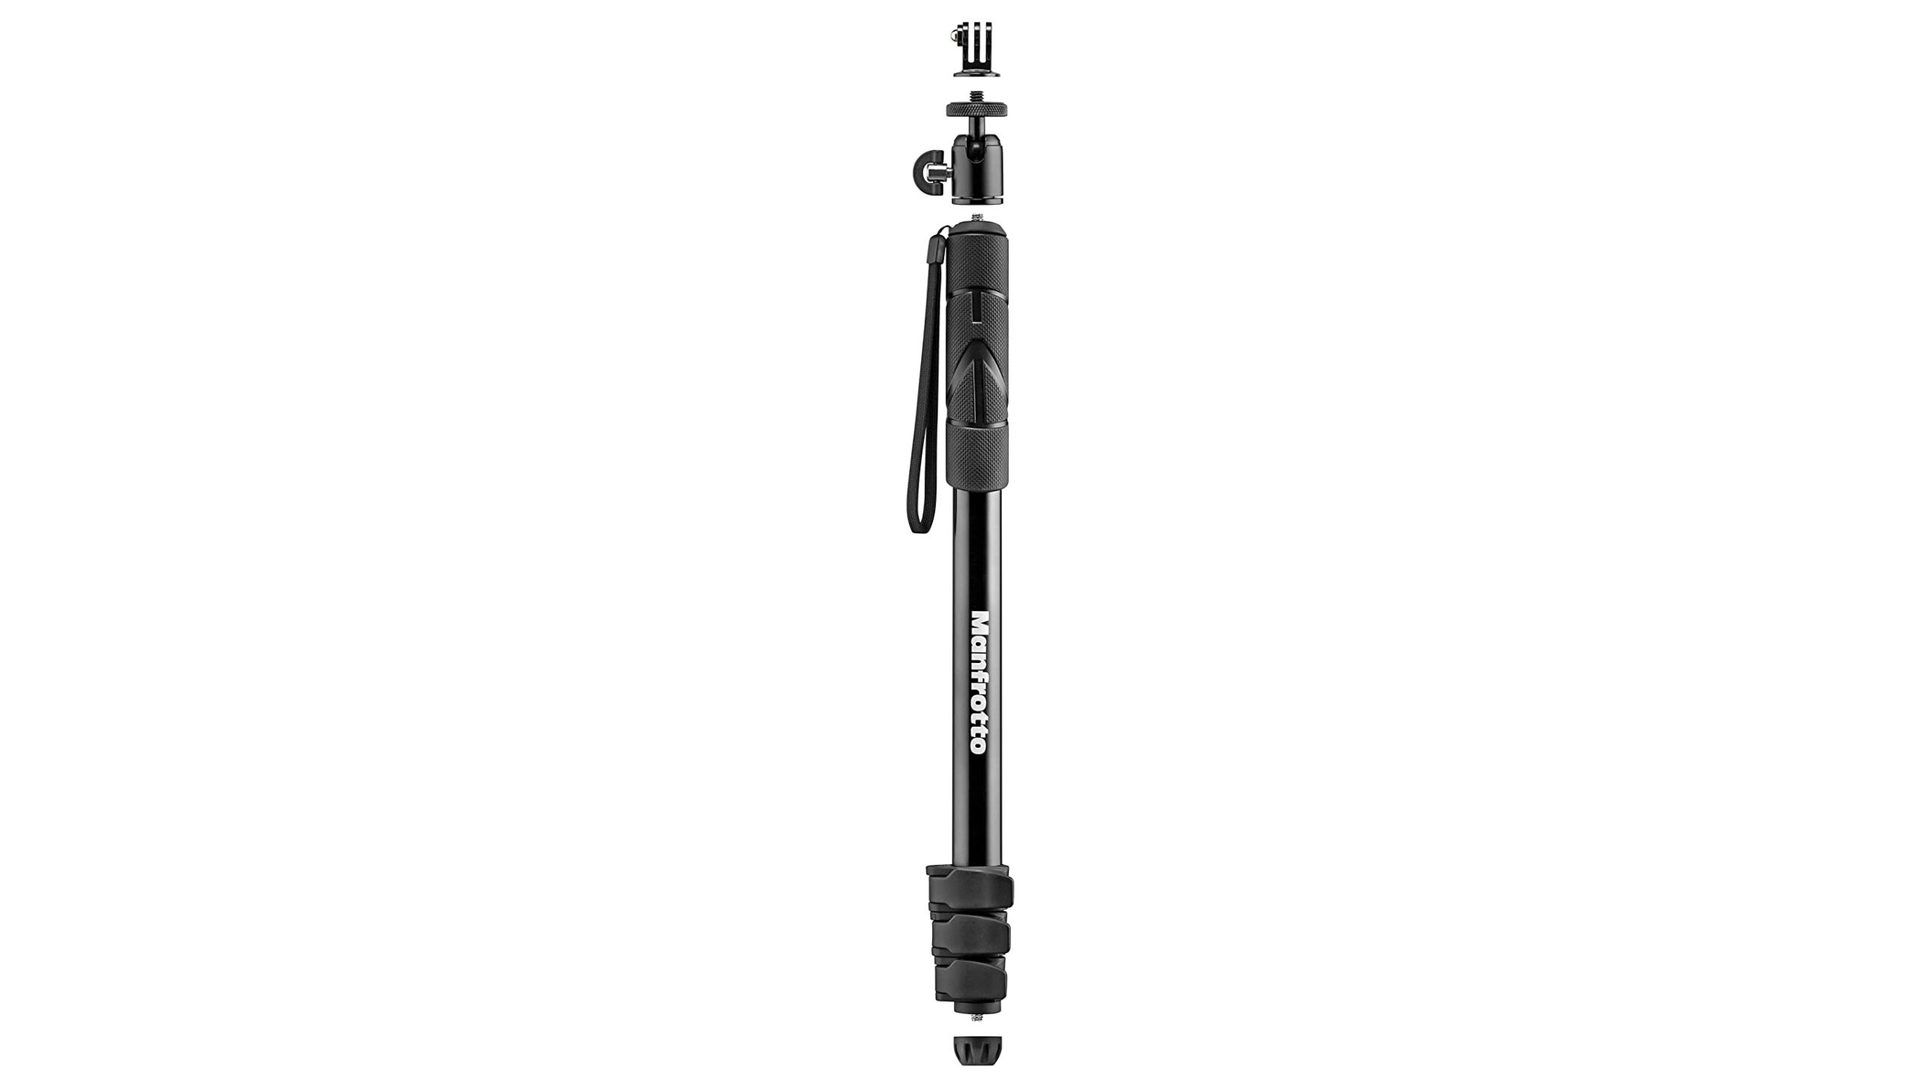 Manfrotto Compact Extreme